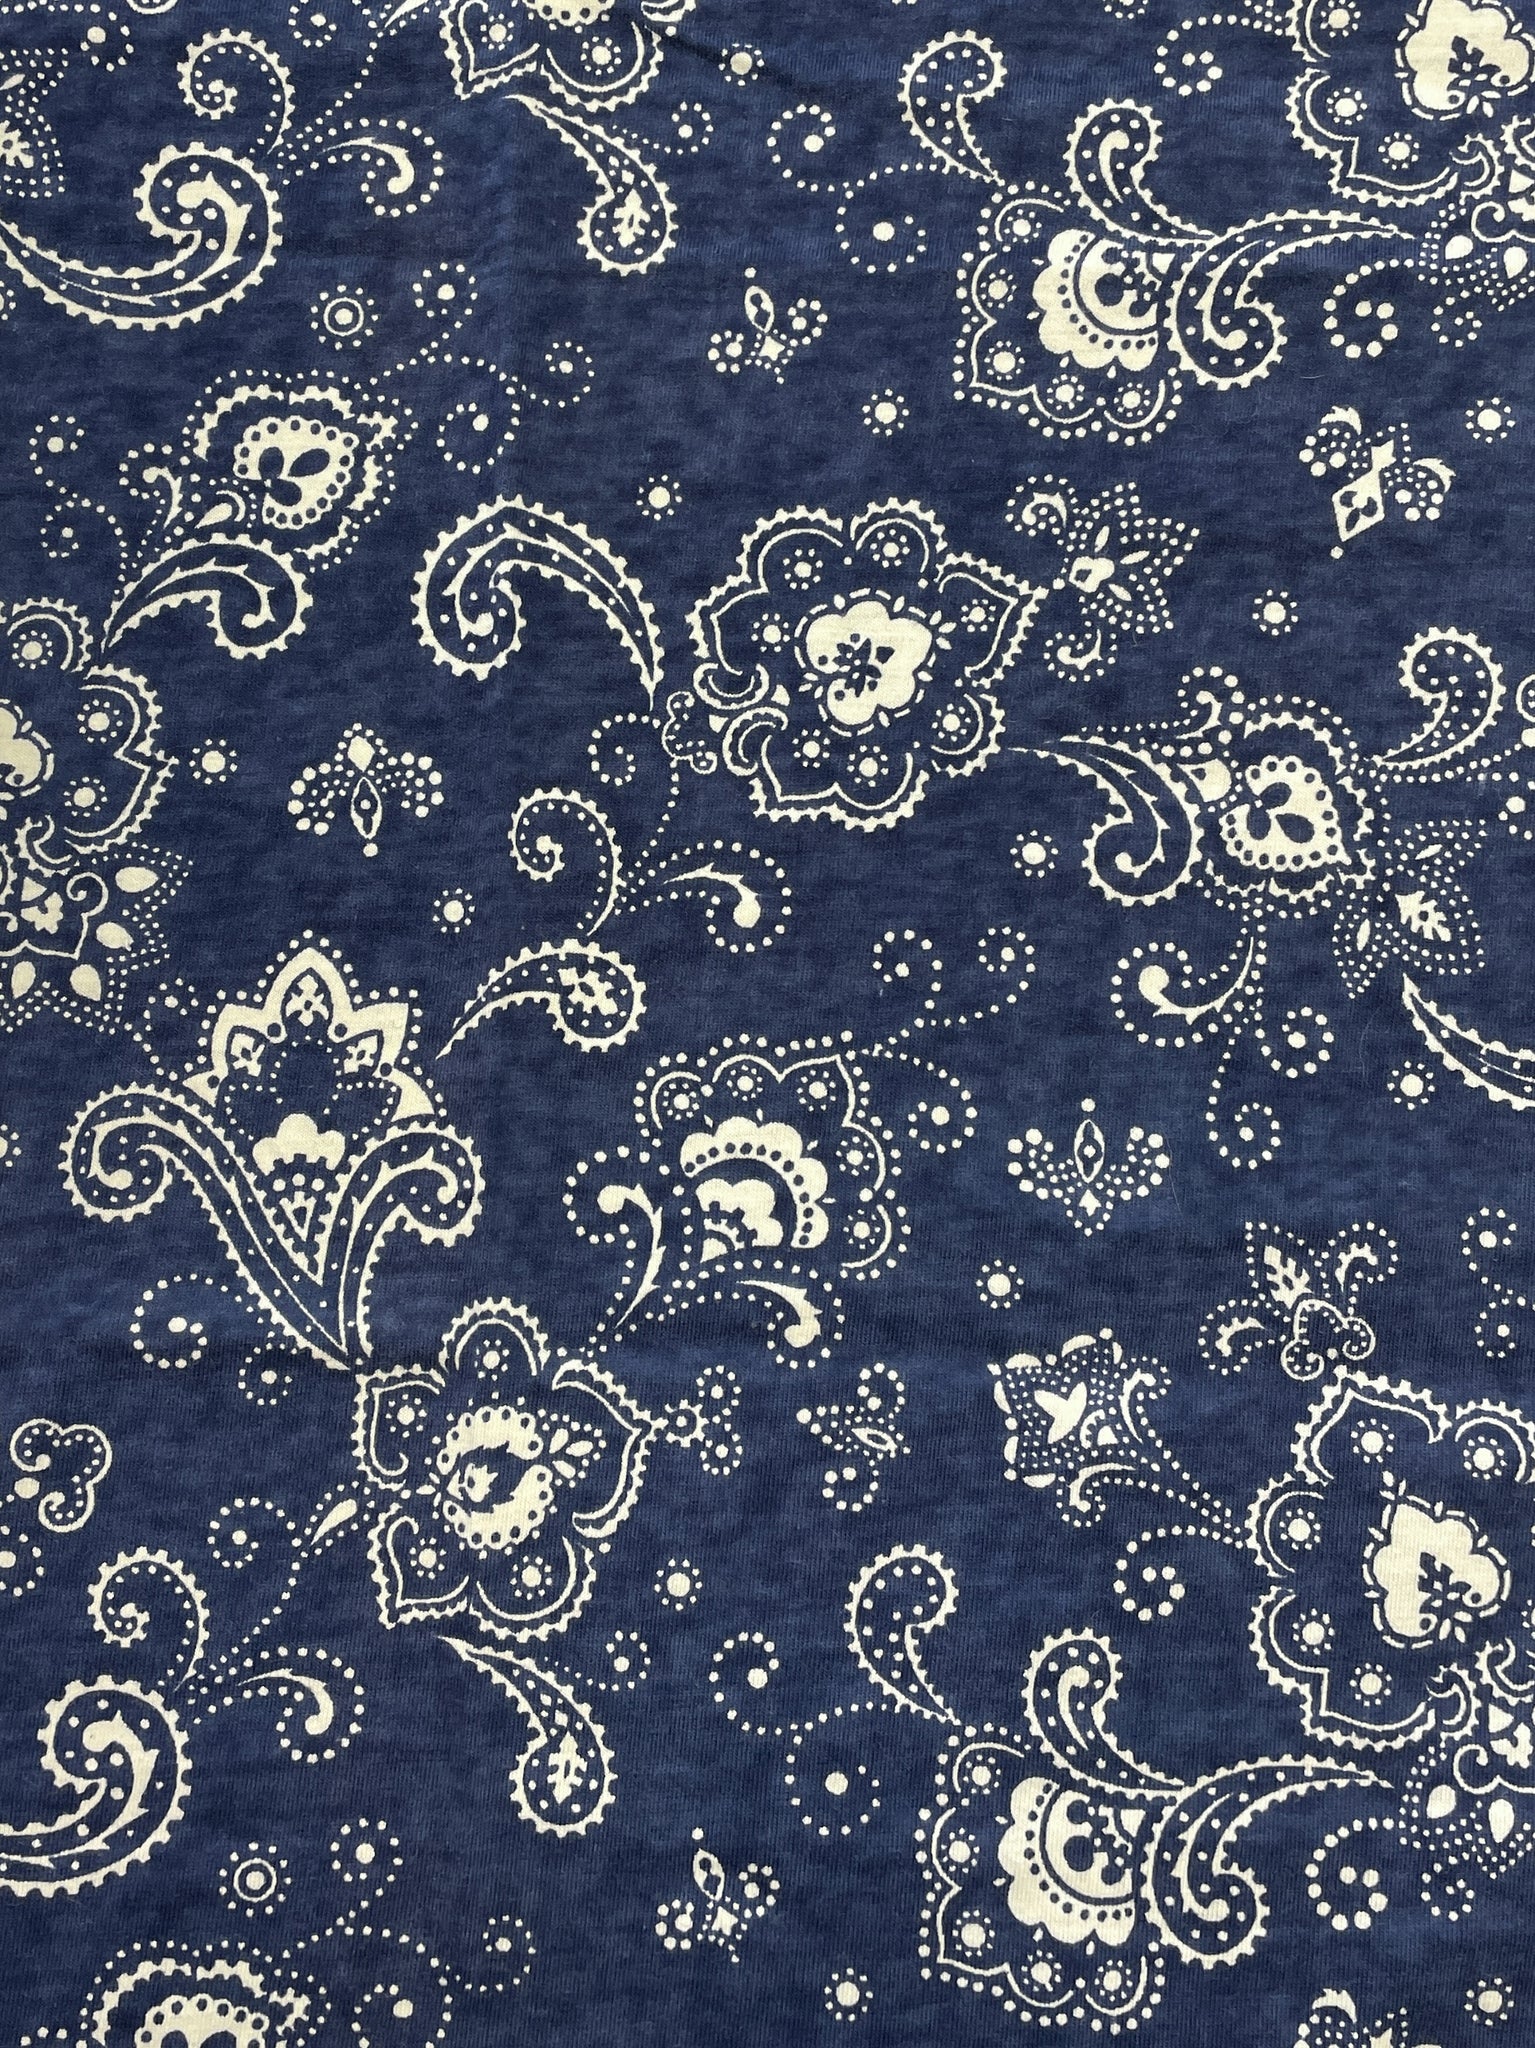 3/4 YD Cotton Knit Remnant - Heather Blue with White Paisley